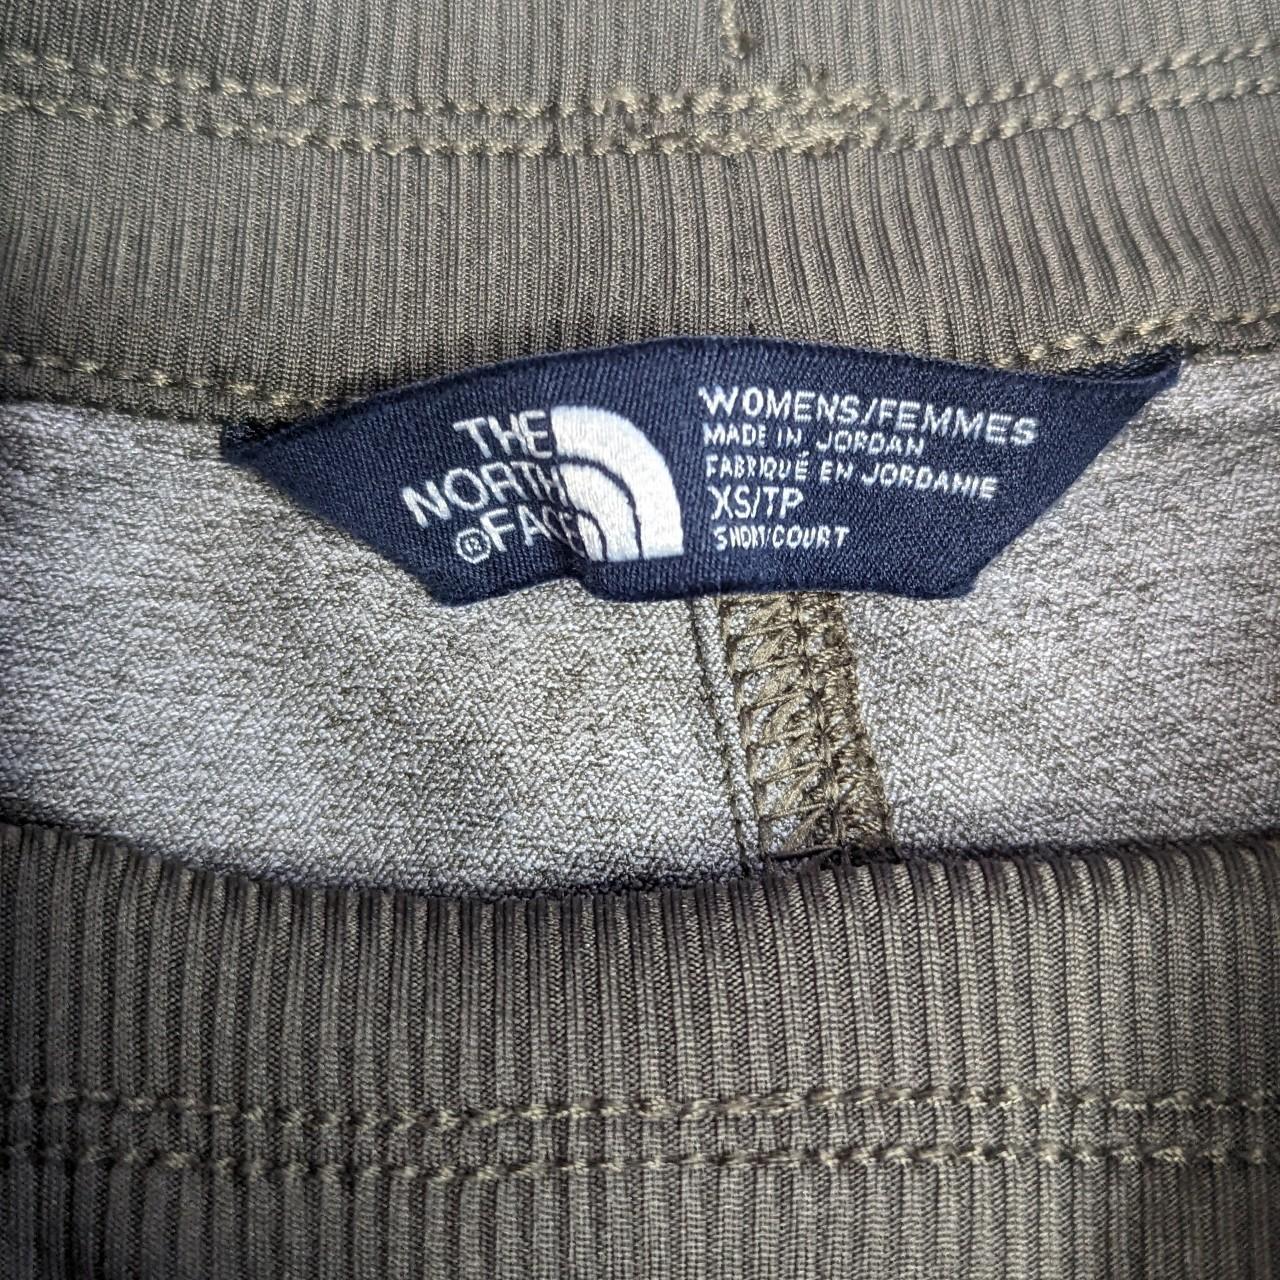 North face pants Size xs petite Taupe green... - Depop